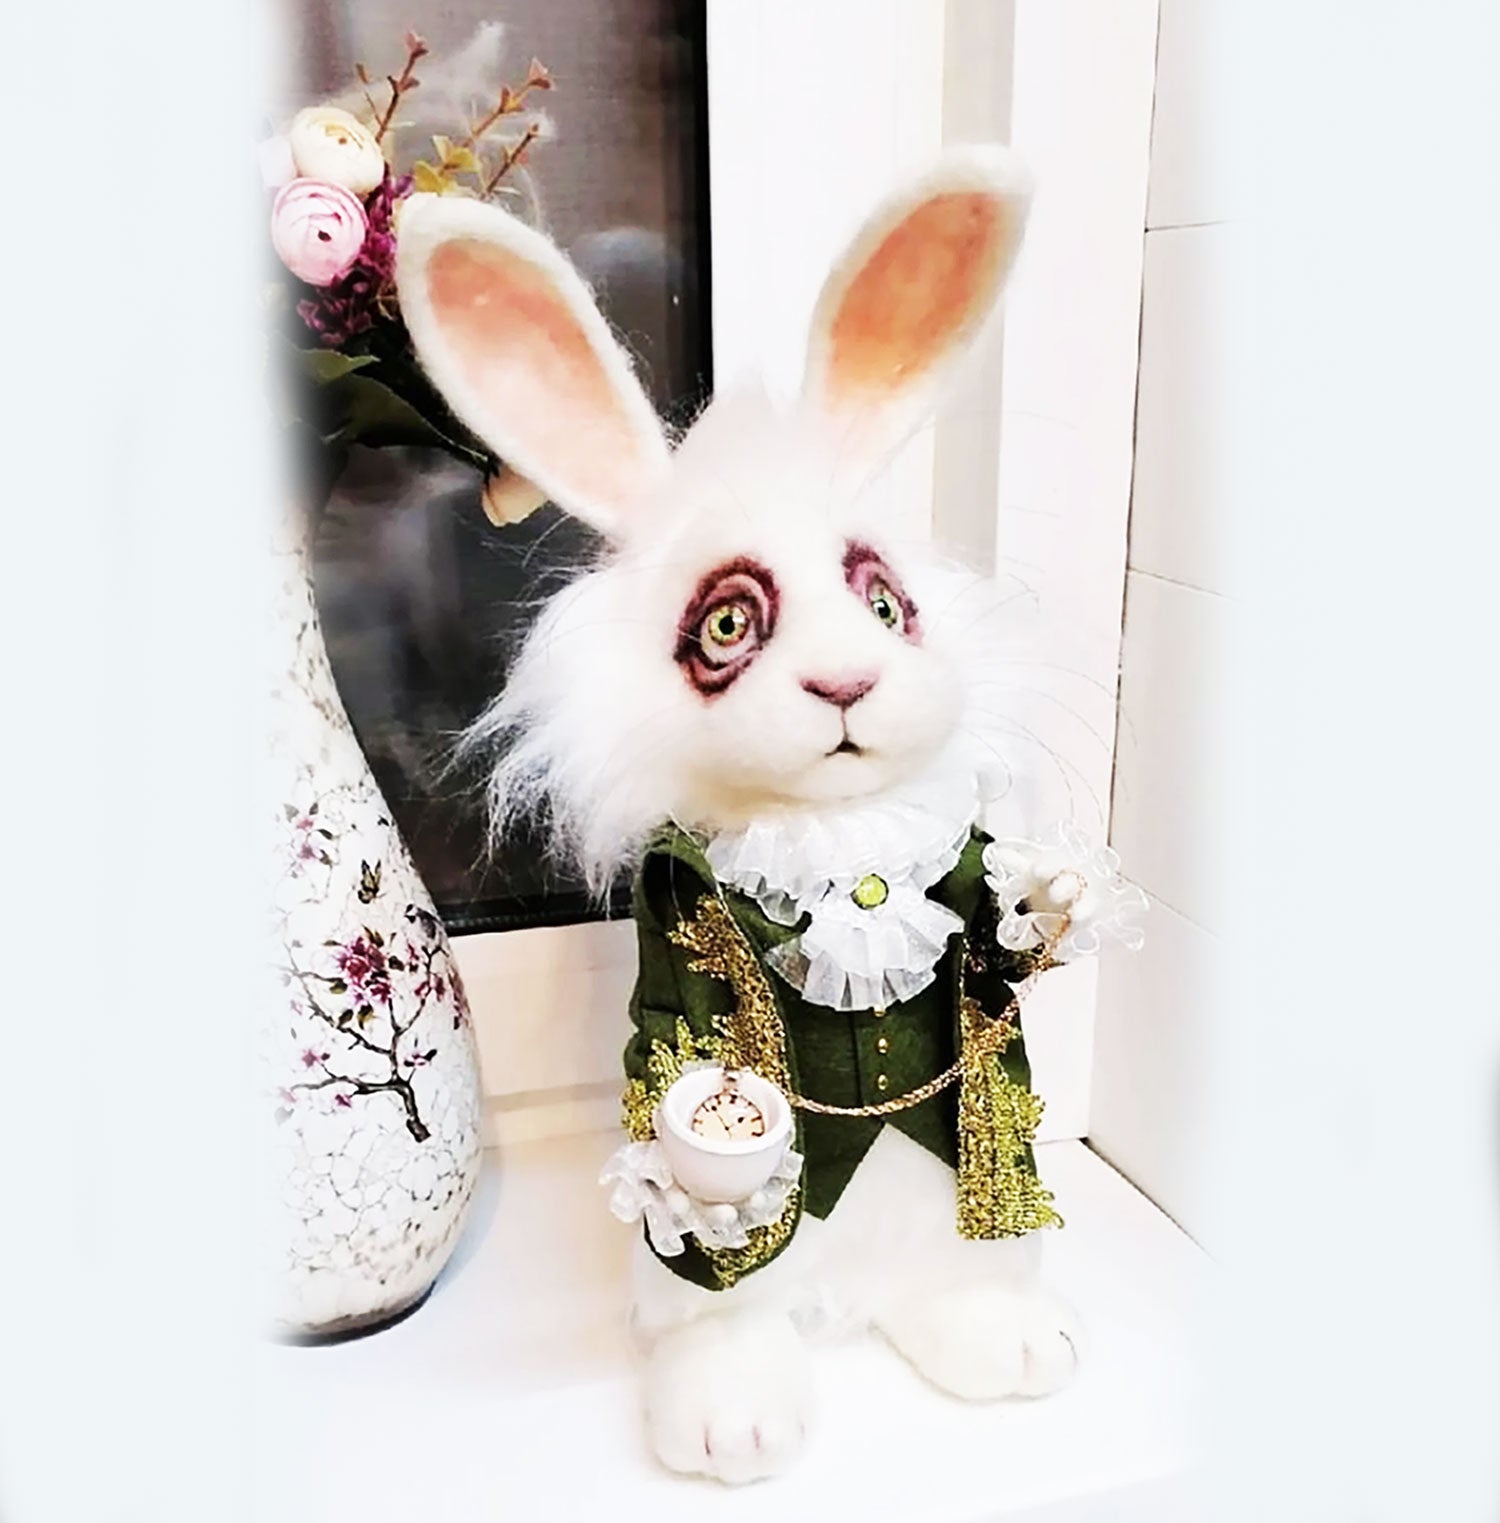 THE WHITE RABBIT From Alice in Wonderland, Needle Felted Rabbit, Bunny Toys,  Stuffed Bunny, Bunny Crafts, Stuffed Animals, Plushies 